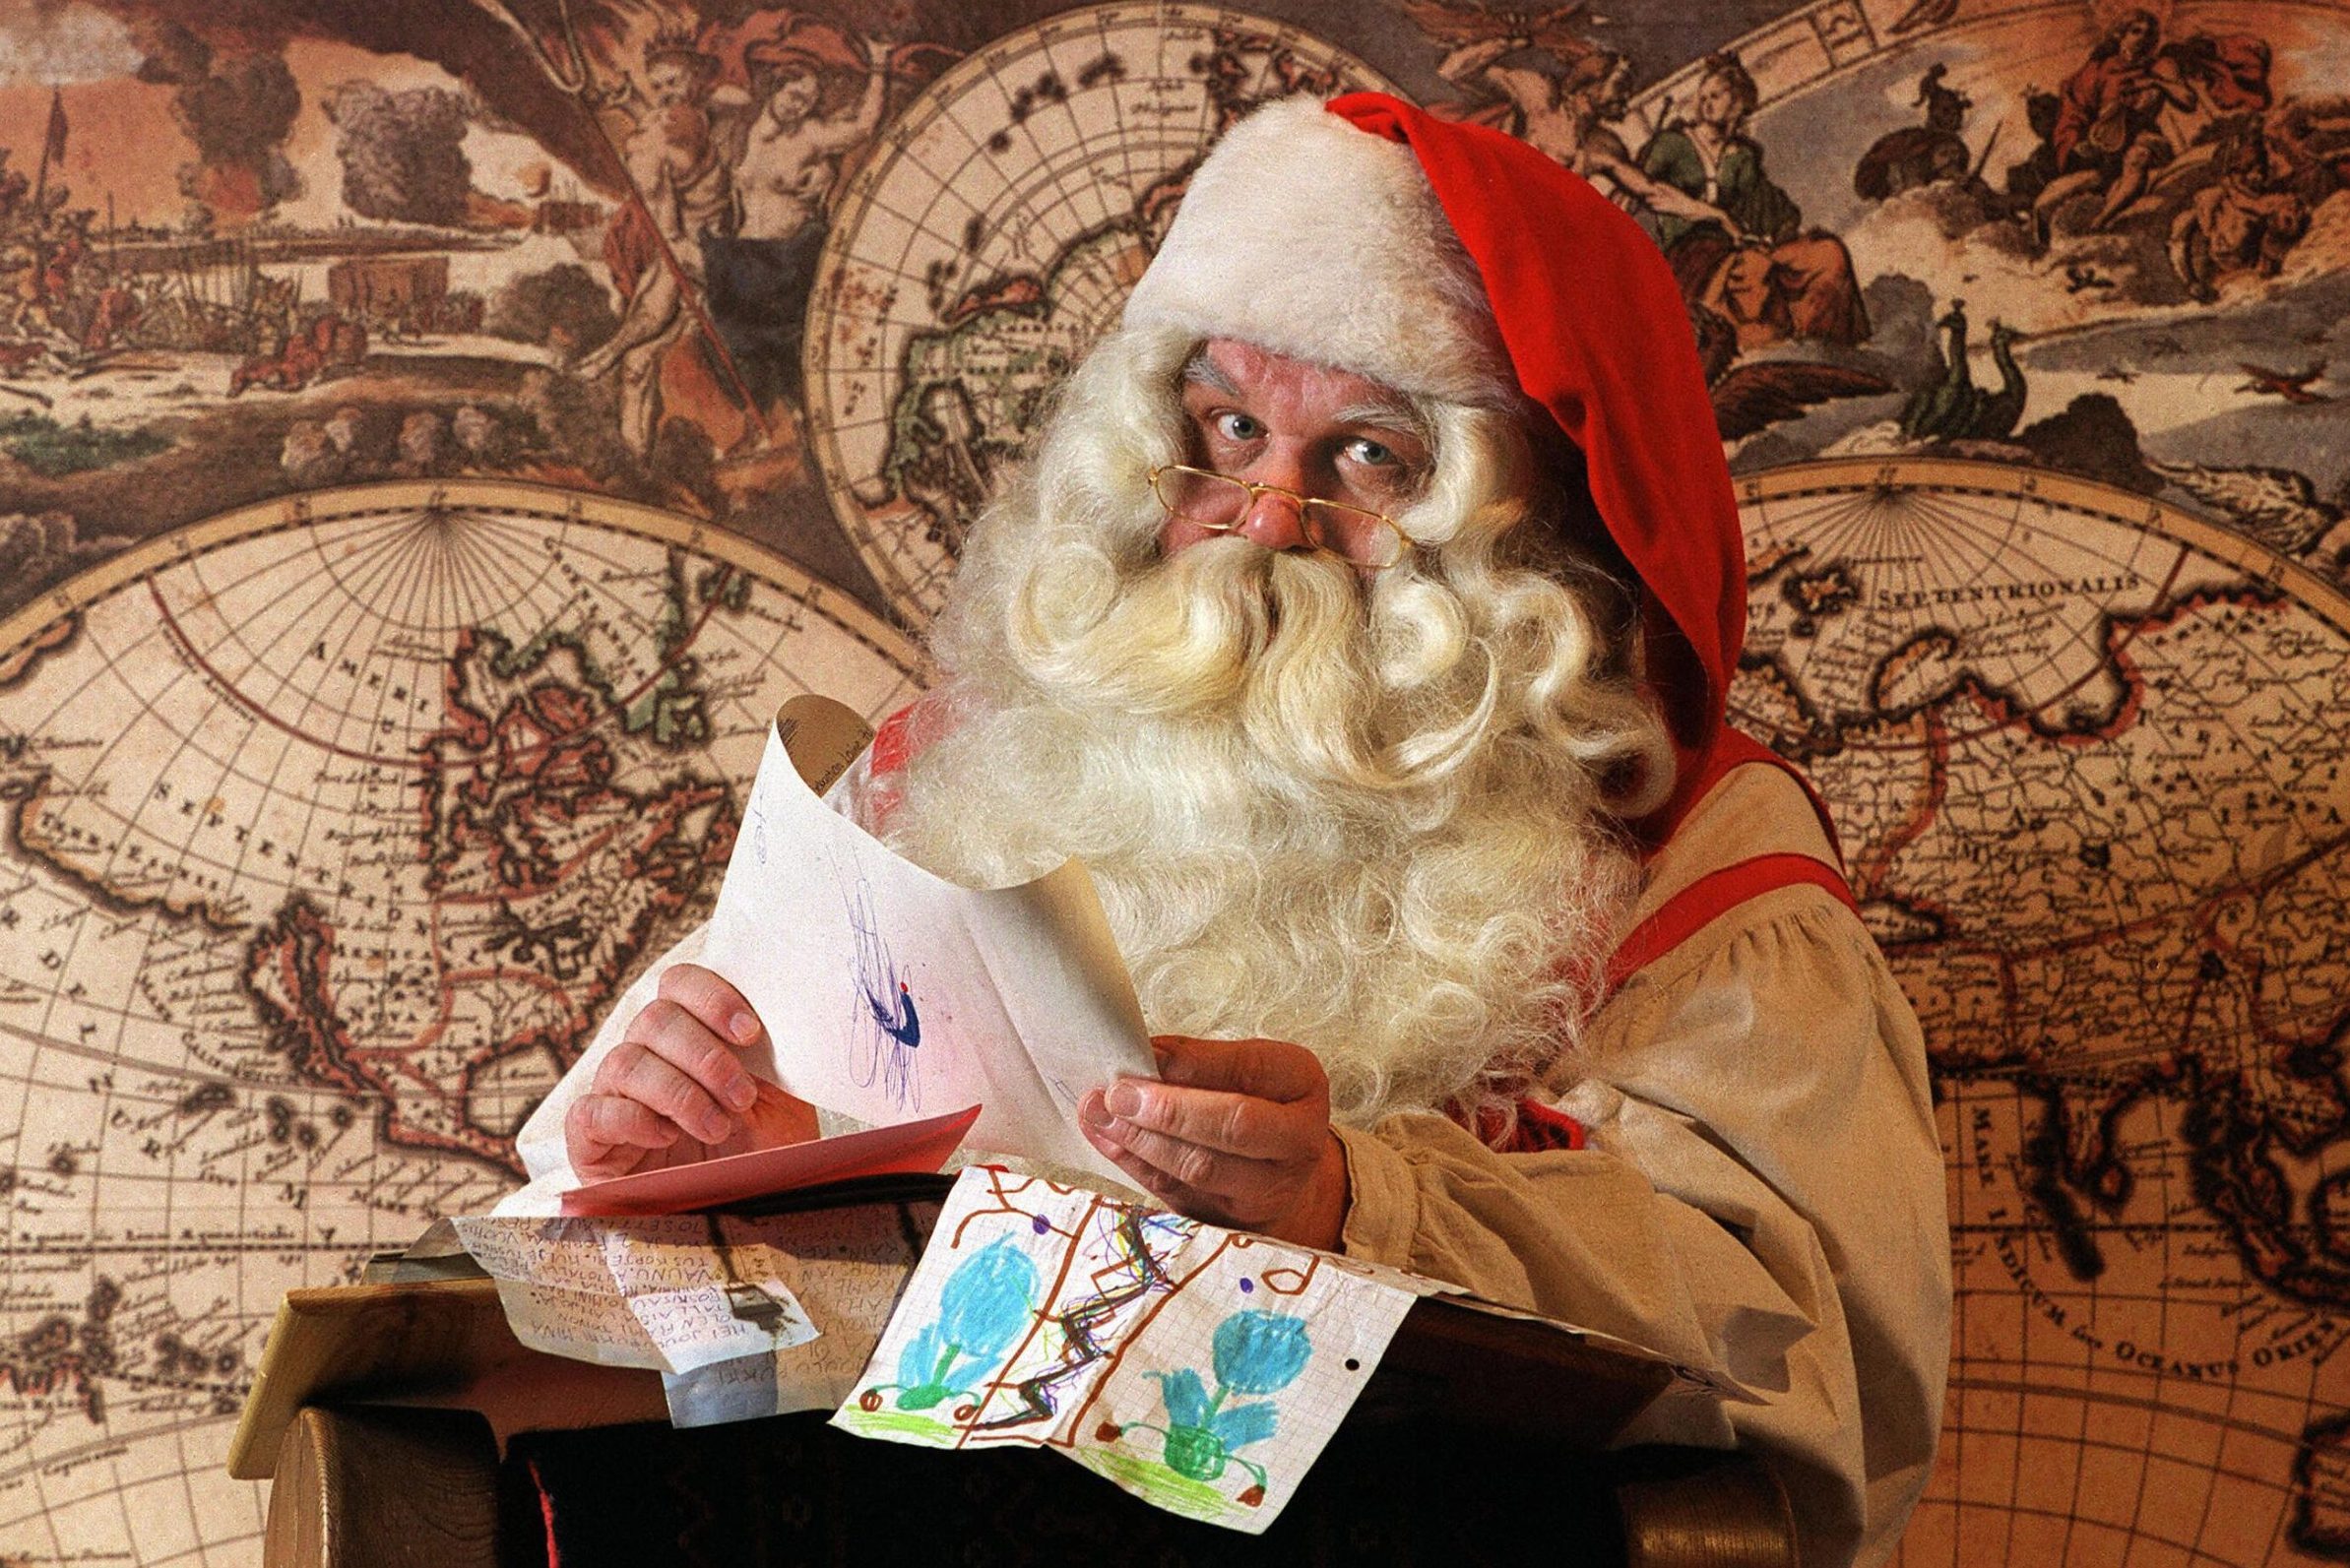 <p>OK, so you know how St. Nicholas became Santa Claus in America, but is Santa real anywhere else around the world? Although many countries have their own Santa-like figures who give <a href="https://www.rd.com/list/gifts-for-boys/" rel="noopener noreferrer">gifts to little boys</a> and <a href="https://www.rd.com/list/gifts-for-girls/" rel="noopener noreferrer">girls</a>, they've increasingly been mingled with the American Santa over the years. "Santa Claus via St. Nicholas gets to American shores, and through Nast and Irving and 'A Visit from Saint Nicholas,' and then all the movies and TV shows and Coke advertisements, gets transformed and Americanized and then gets shipped around the entire world as another great cultural imperialist act of the United States," Thompson says. From his roots in the Netherlands, the American Santa Claus has come full circle and now influences Europe and the rest of the globe.</p>